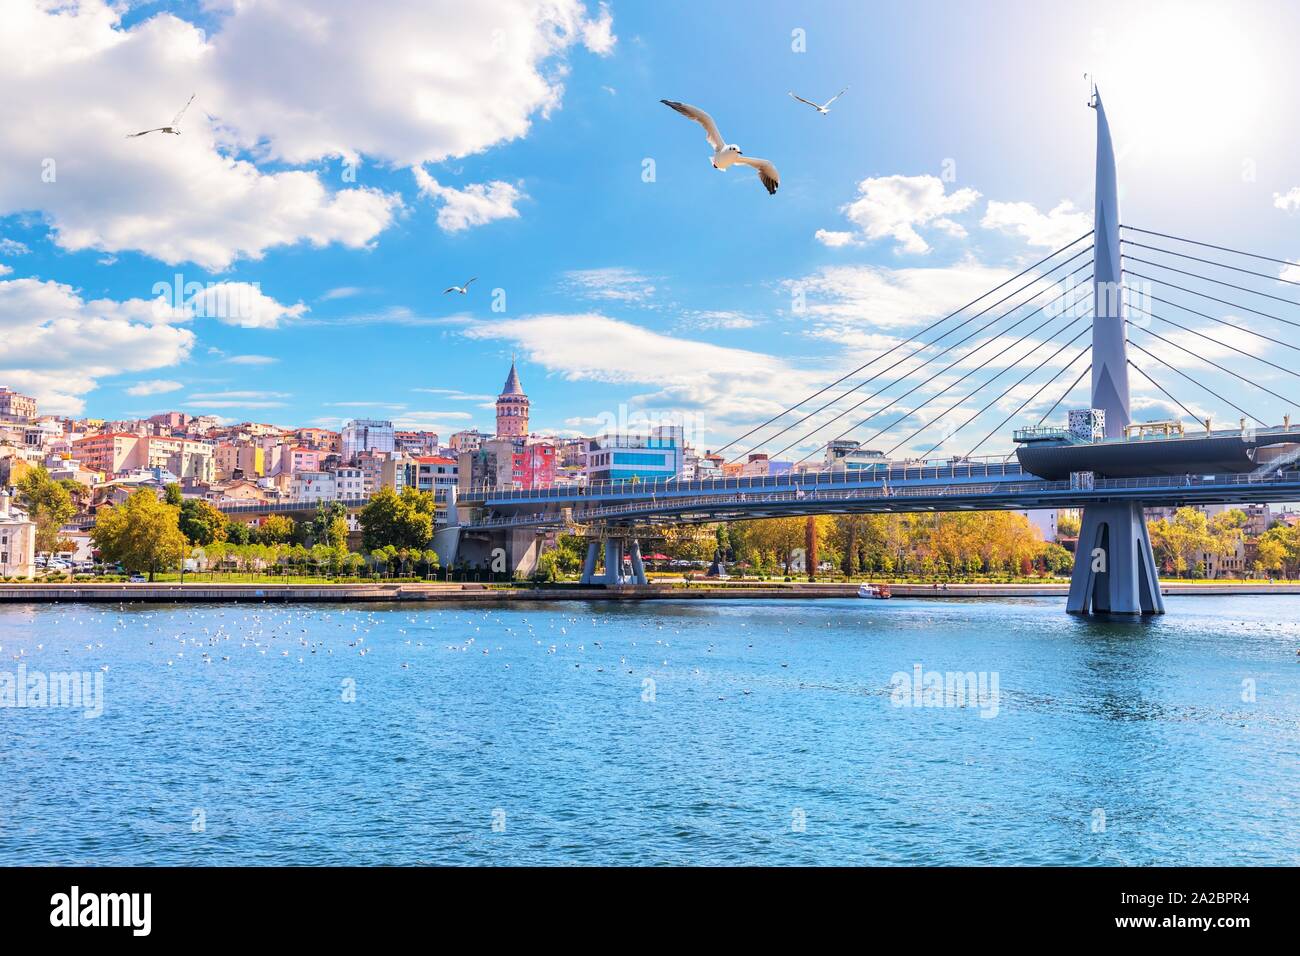 Halic Metro Bridge and Galata Tower on the background, view from the Golden Horn, Istanbul, Turkey. Stock Photo